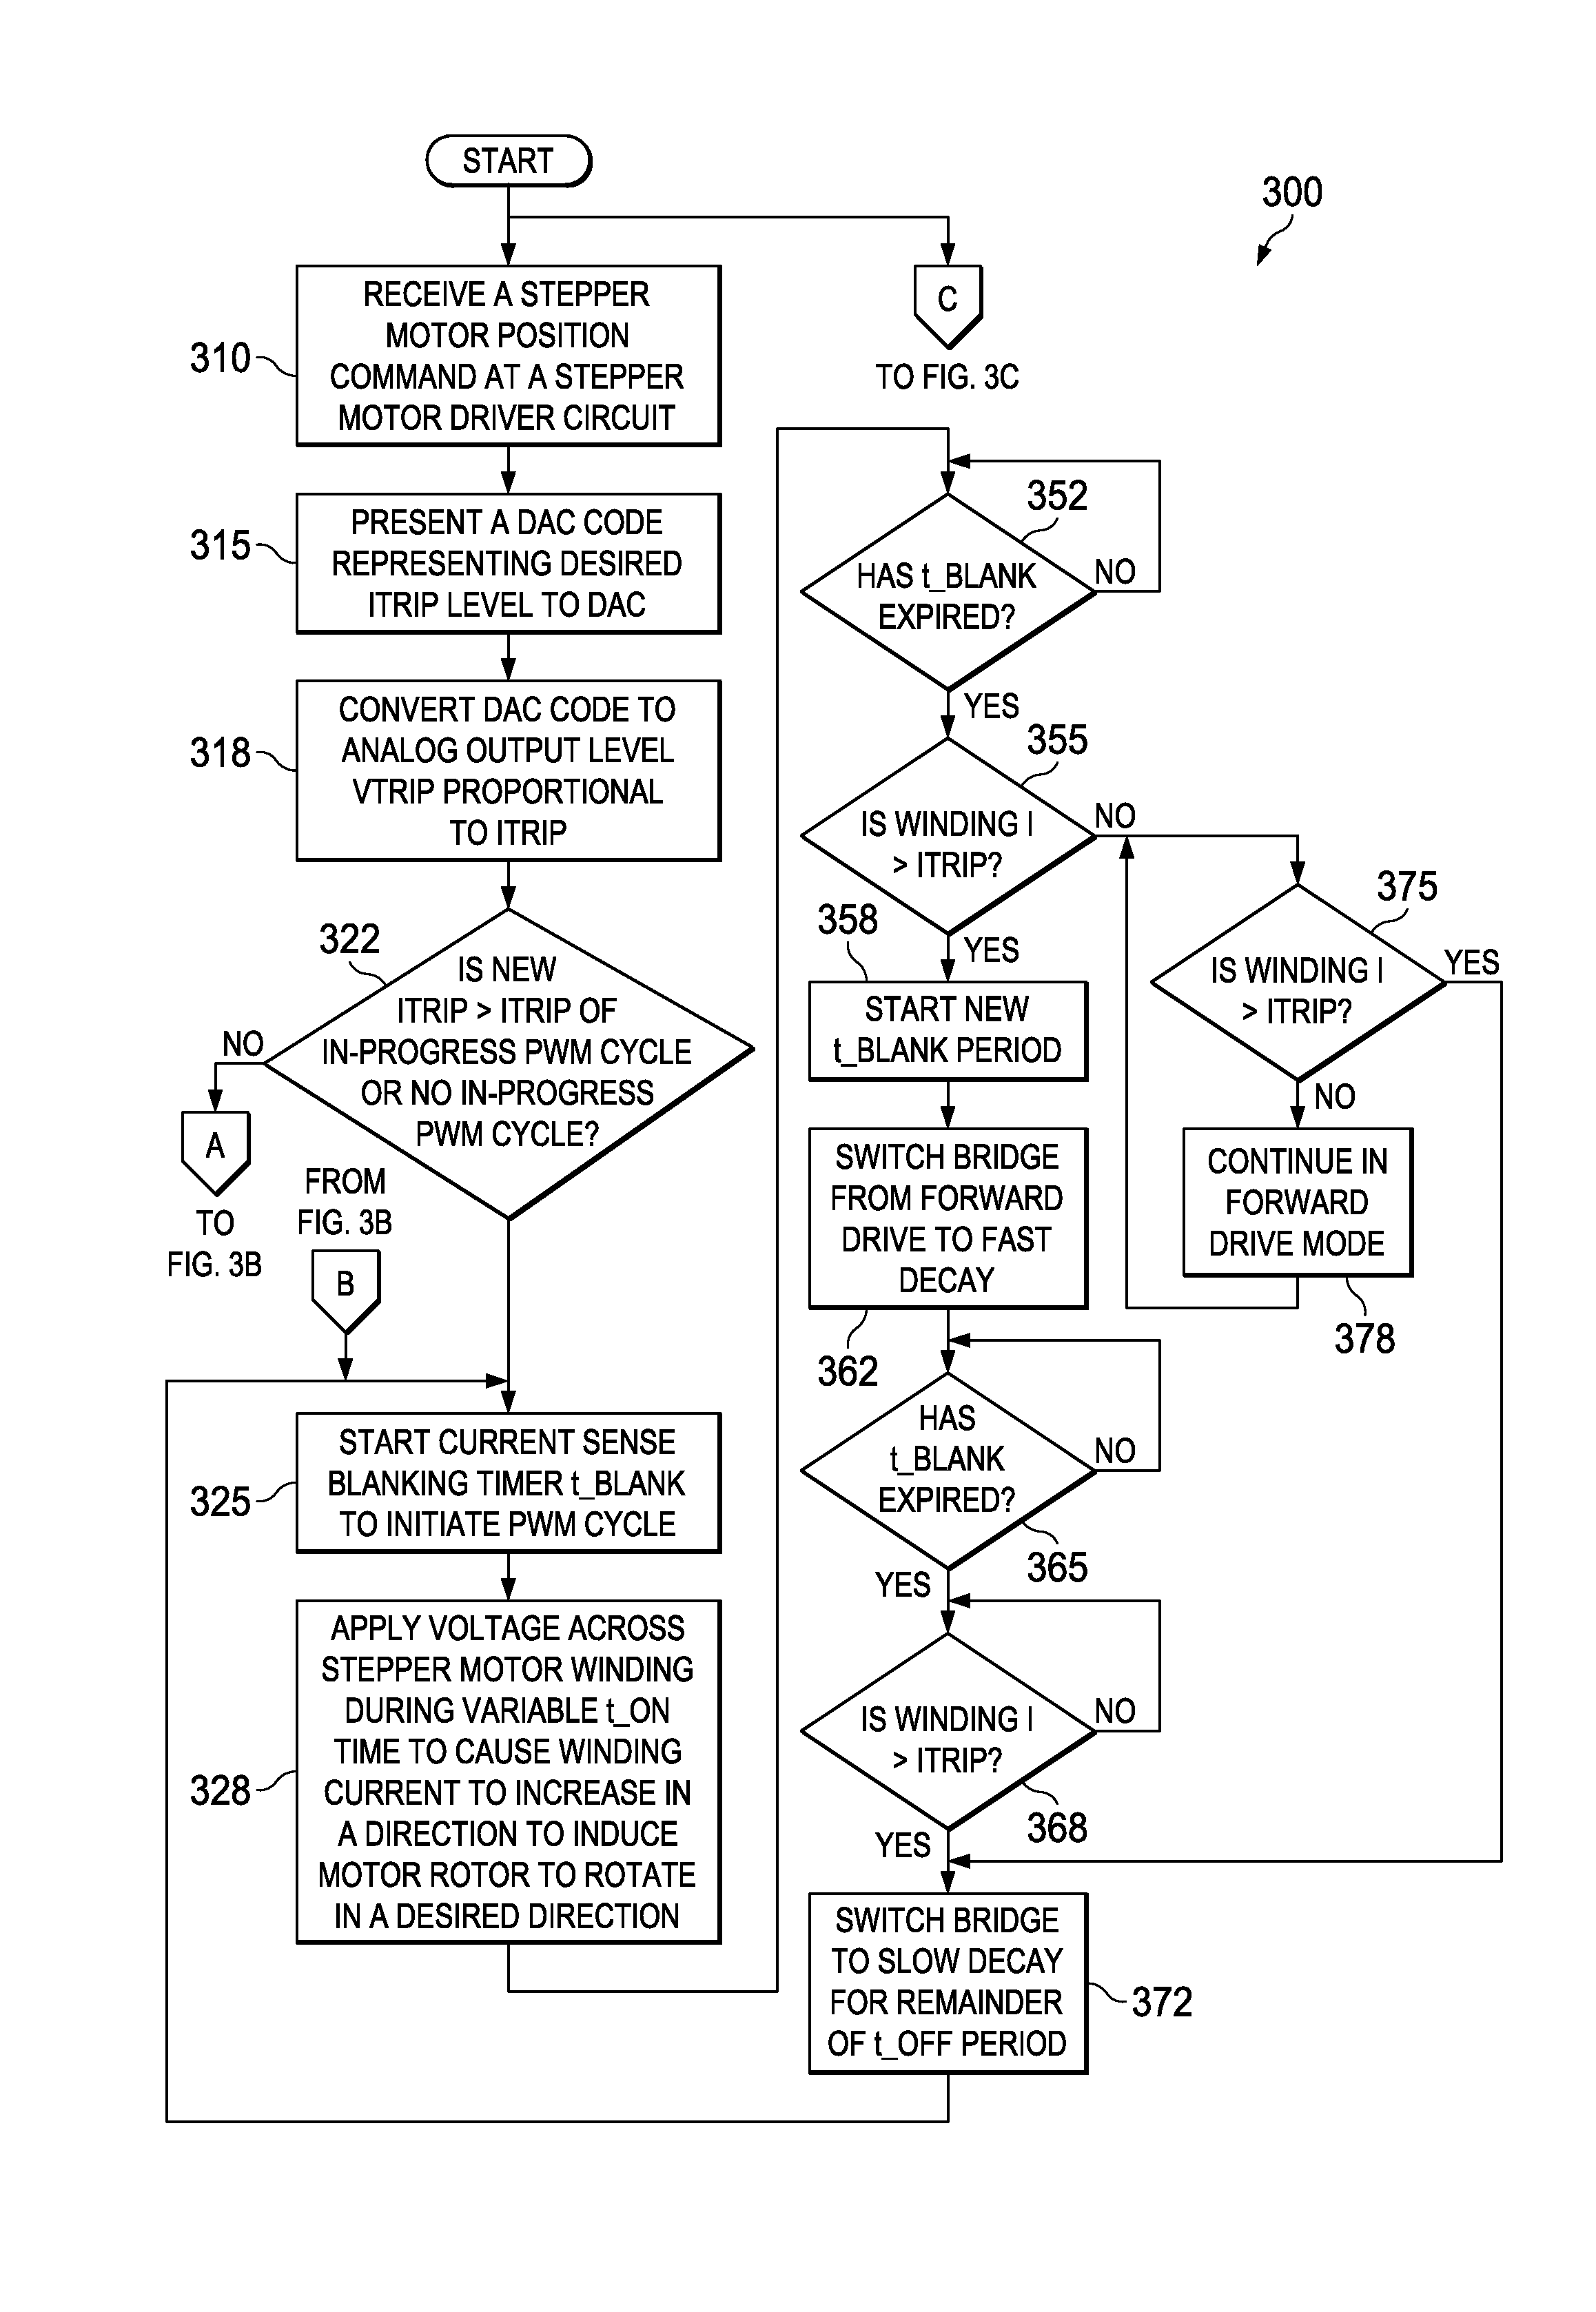 Dynamic mixed-mode current decay apparatus and methods